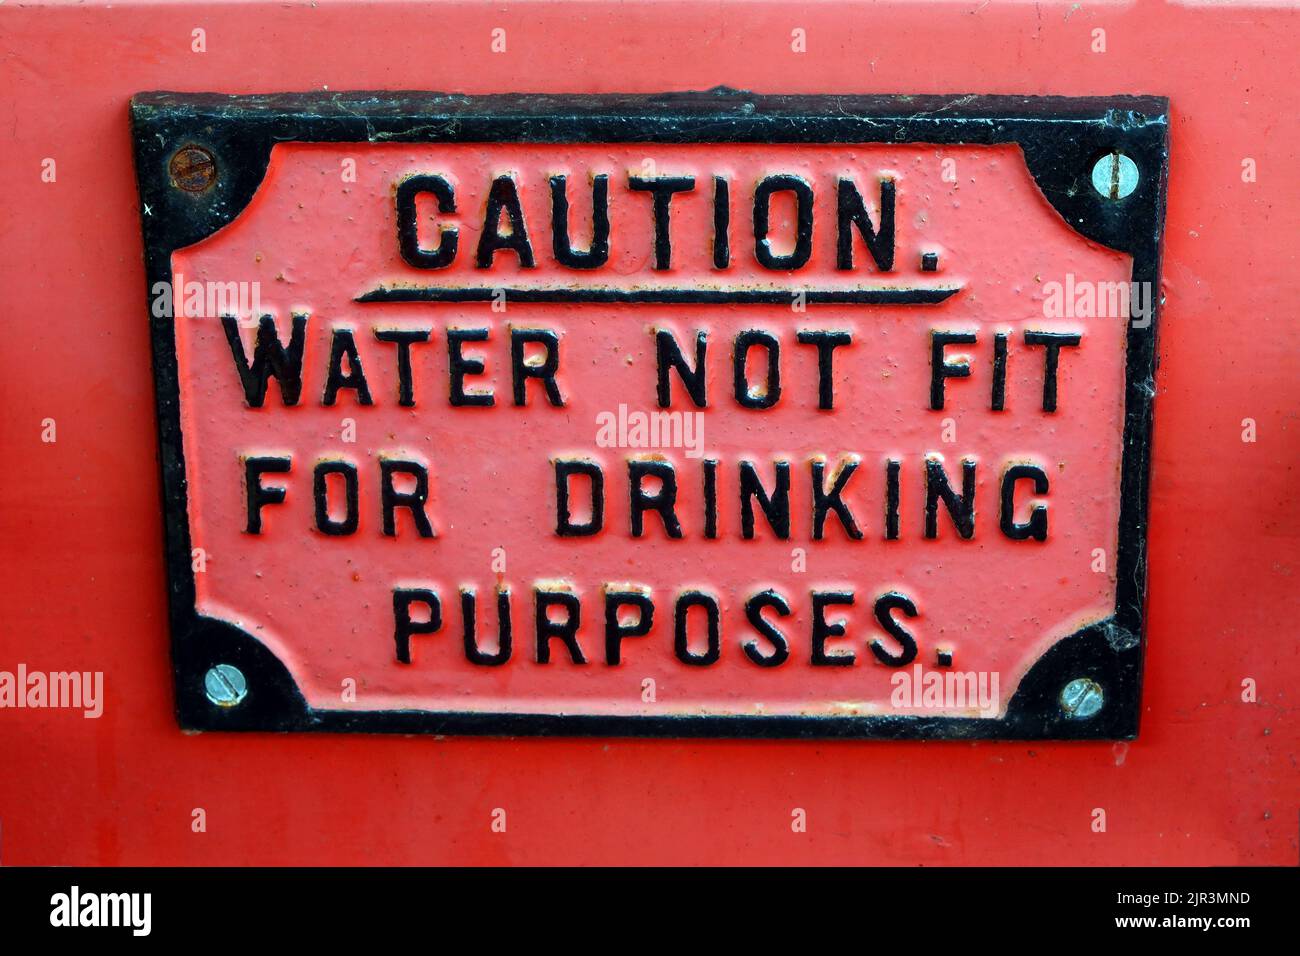 Warning sign, caution, Water not fit for drinking purposes, in iron, painted red Stock Photo